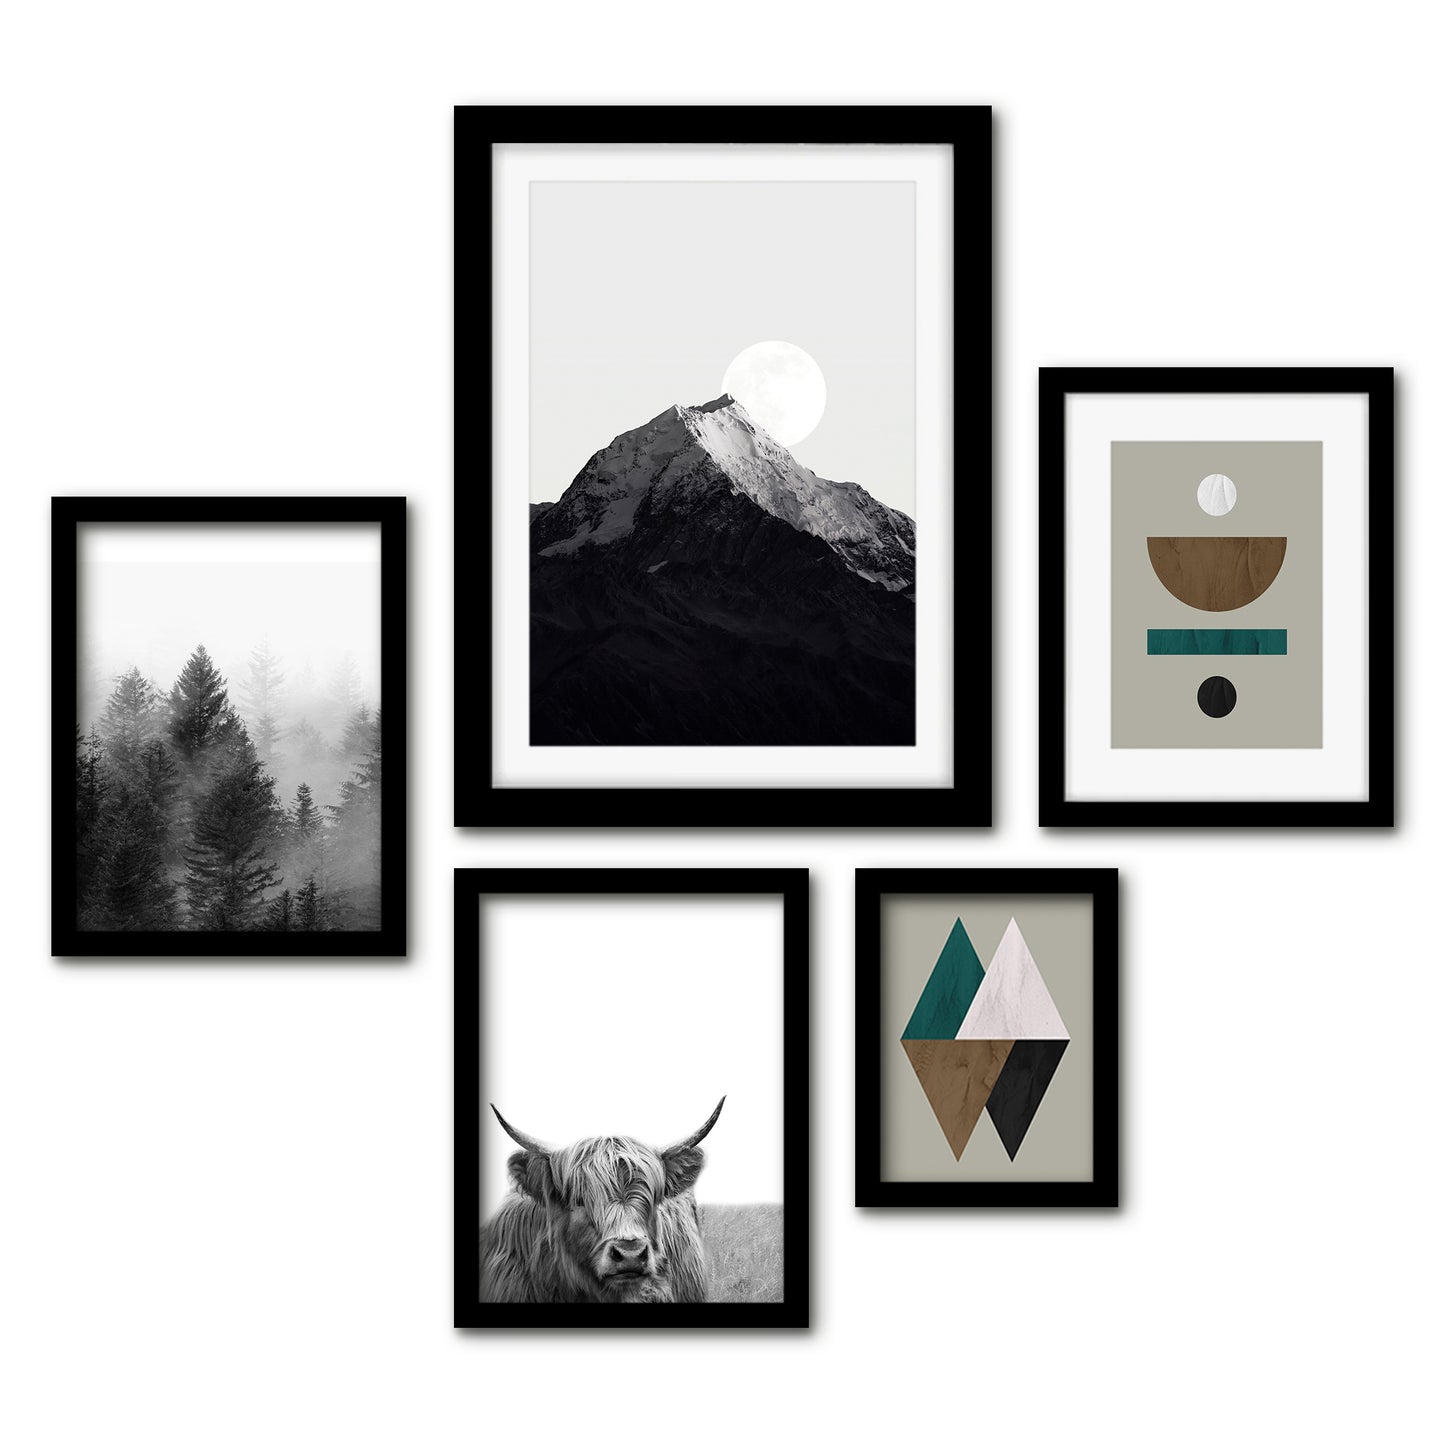 Americanflat 5 Piece Black Framed Gallery Wall Art Set - Black & White L&scape & Earth Tones Abstract Nature